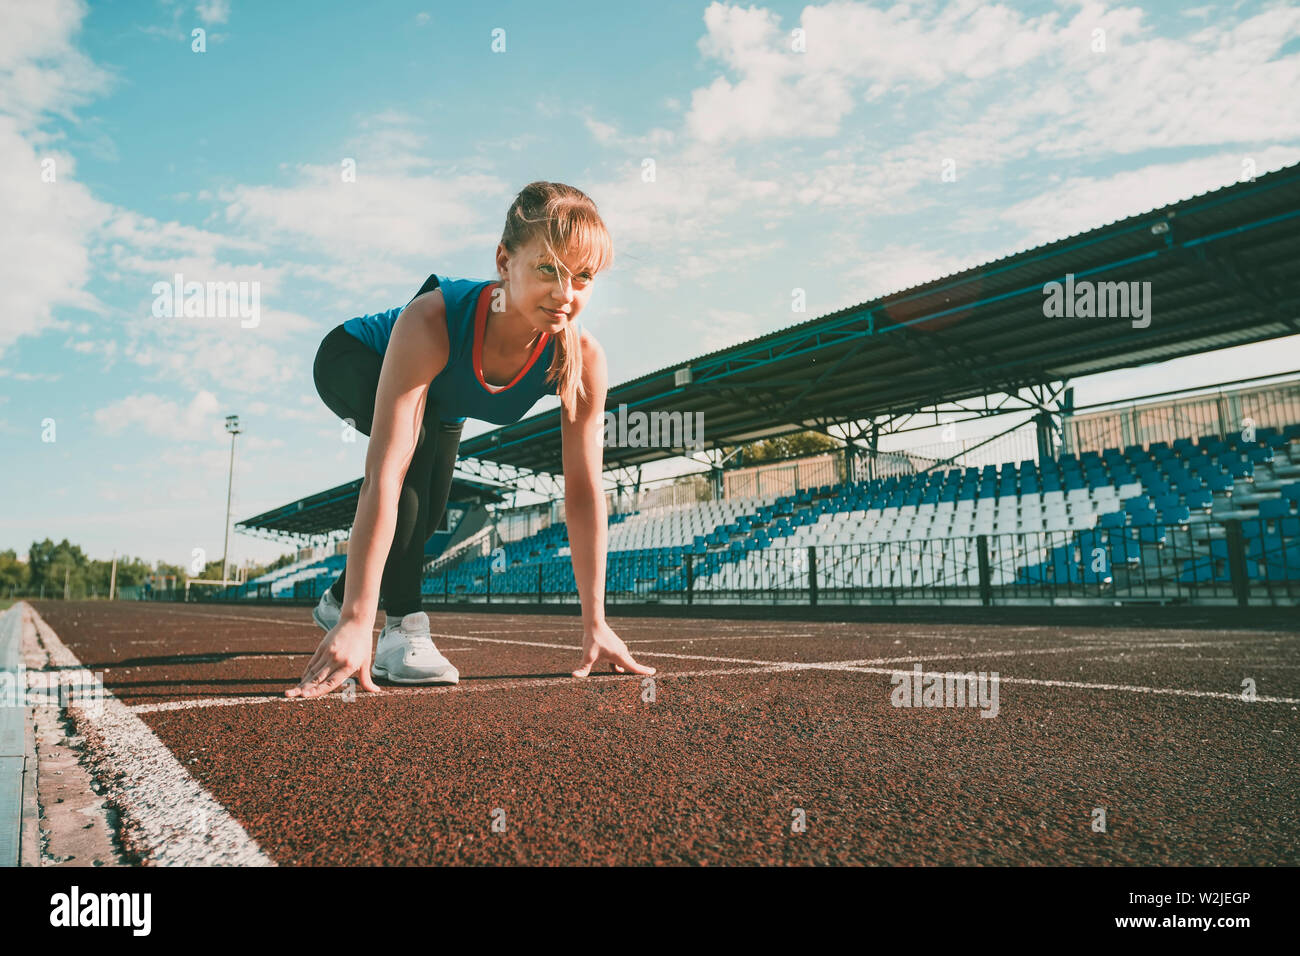 Ready to go. Young fitness blonde girl wearing blue top, black tights, sneakers and pony-tail on the starting line of stadium track, preparing for a Stock Photo